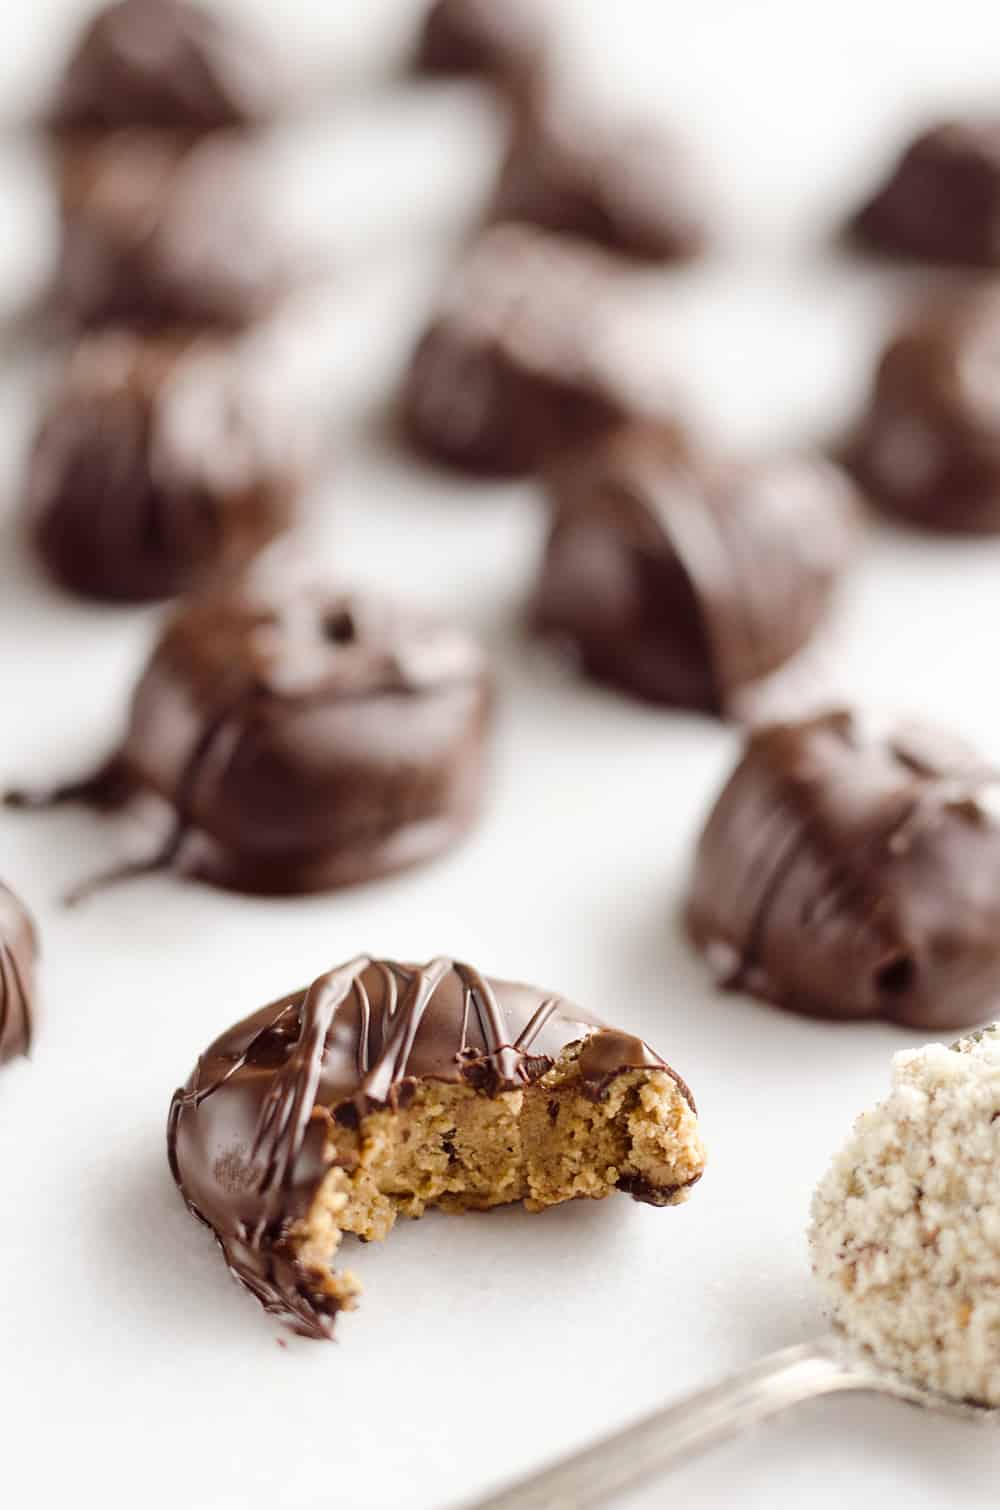 Protein Peanut Butter Truffles are an amazing 100 calorie treat with only 5 ingredients. They are packed with 5 grams of protein for healthy a dessert you can feel good about!